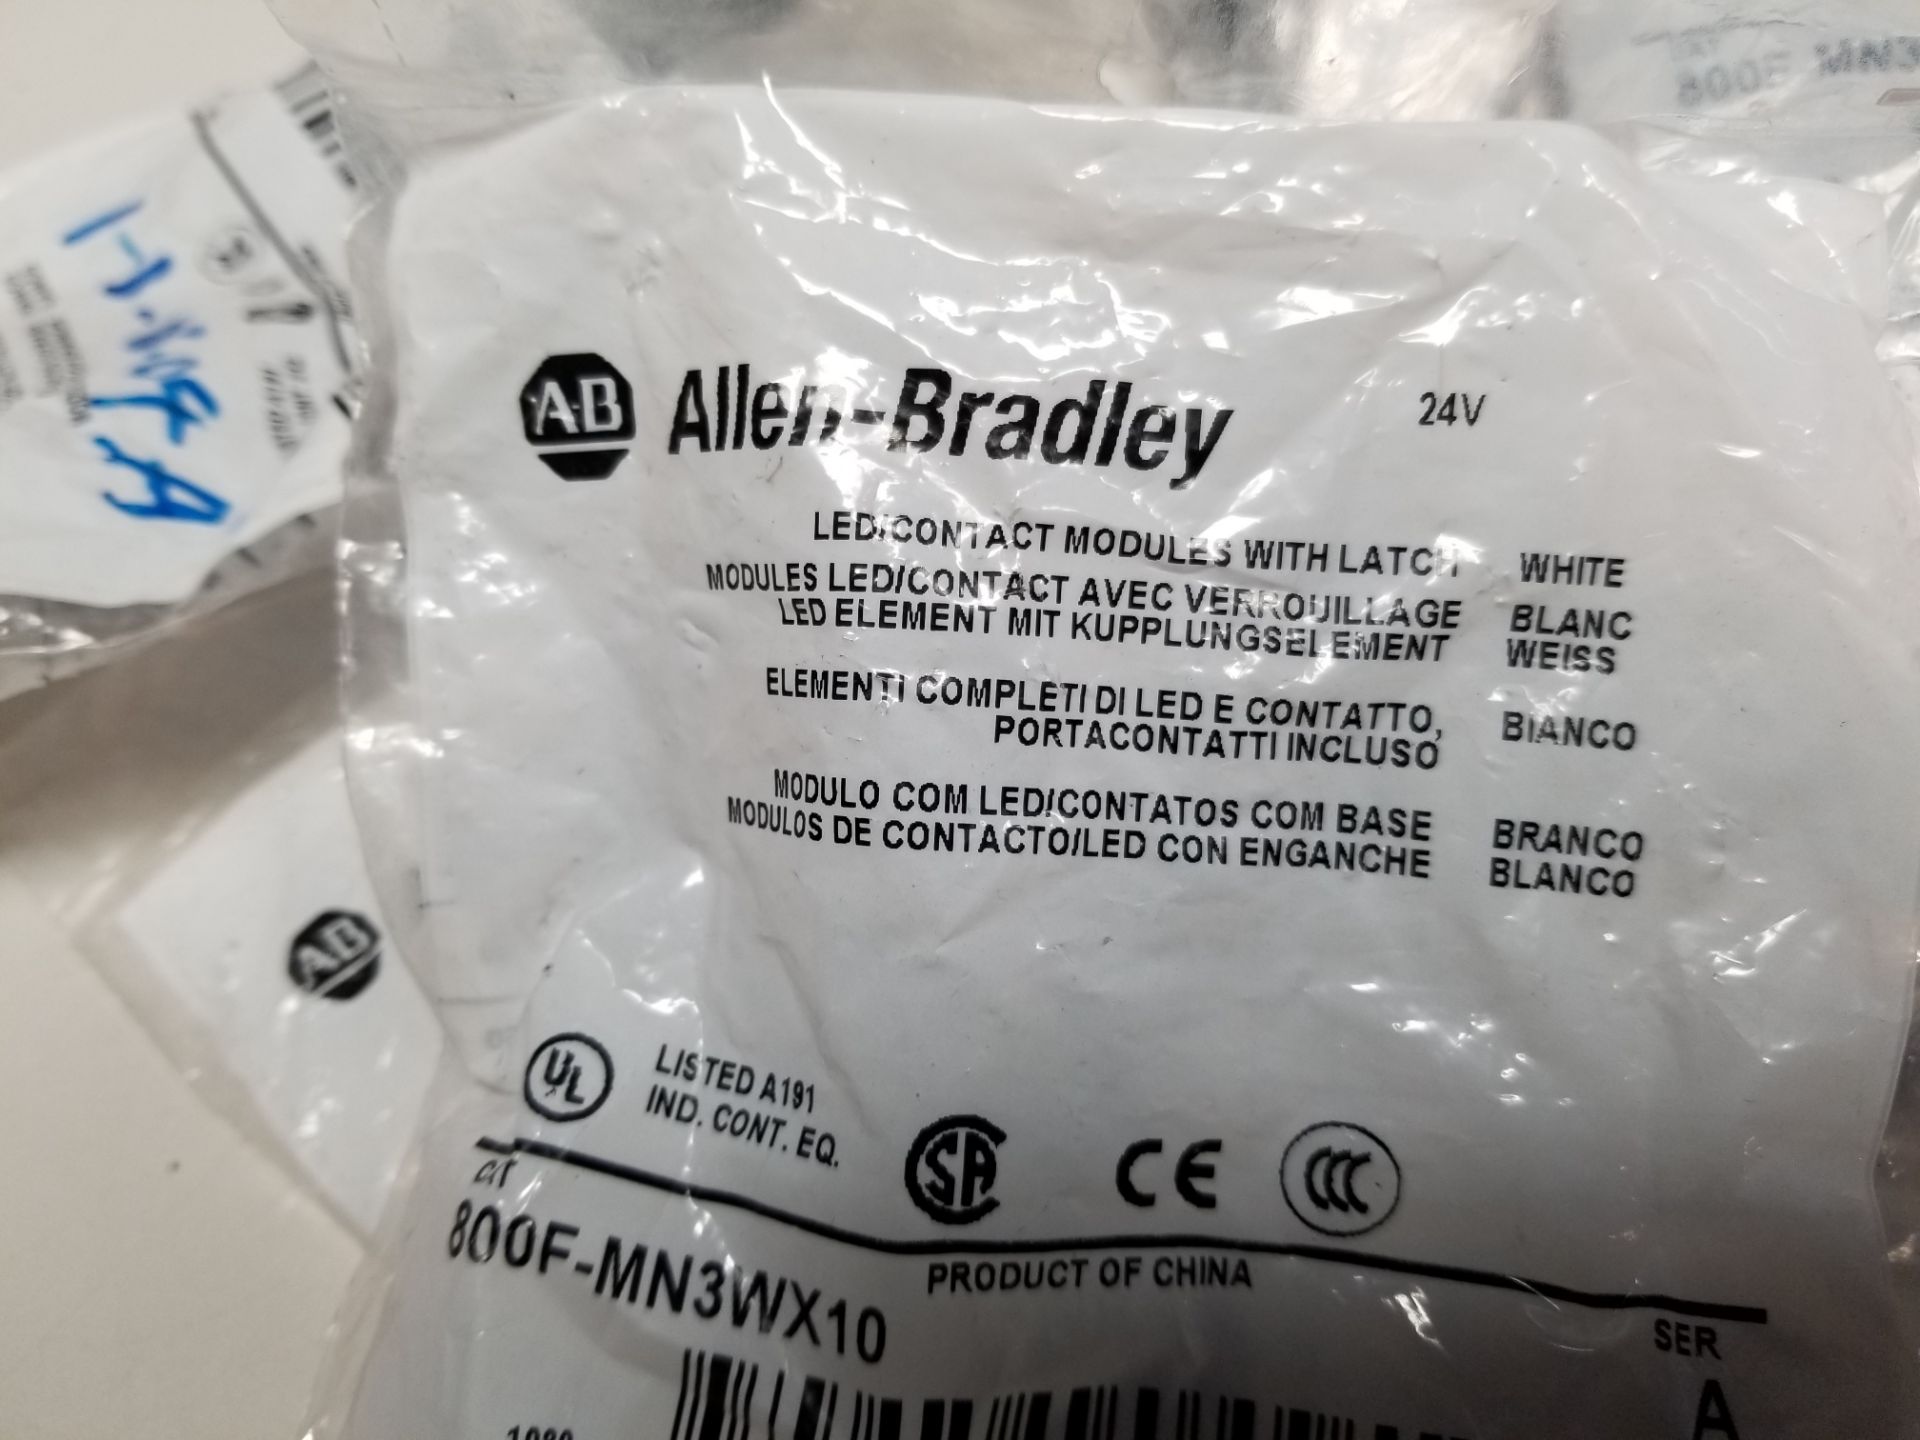 LOT OF NEW ALLEN BRADLEY LED/CONTACT MODULES WITH LATCH - Image 4 of 5